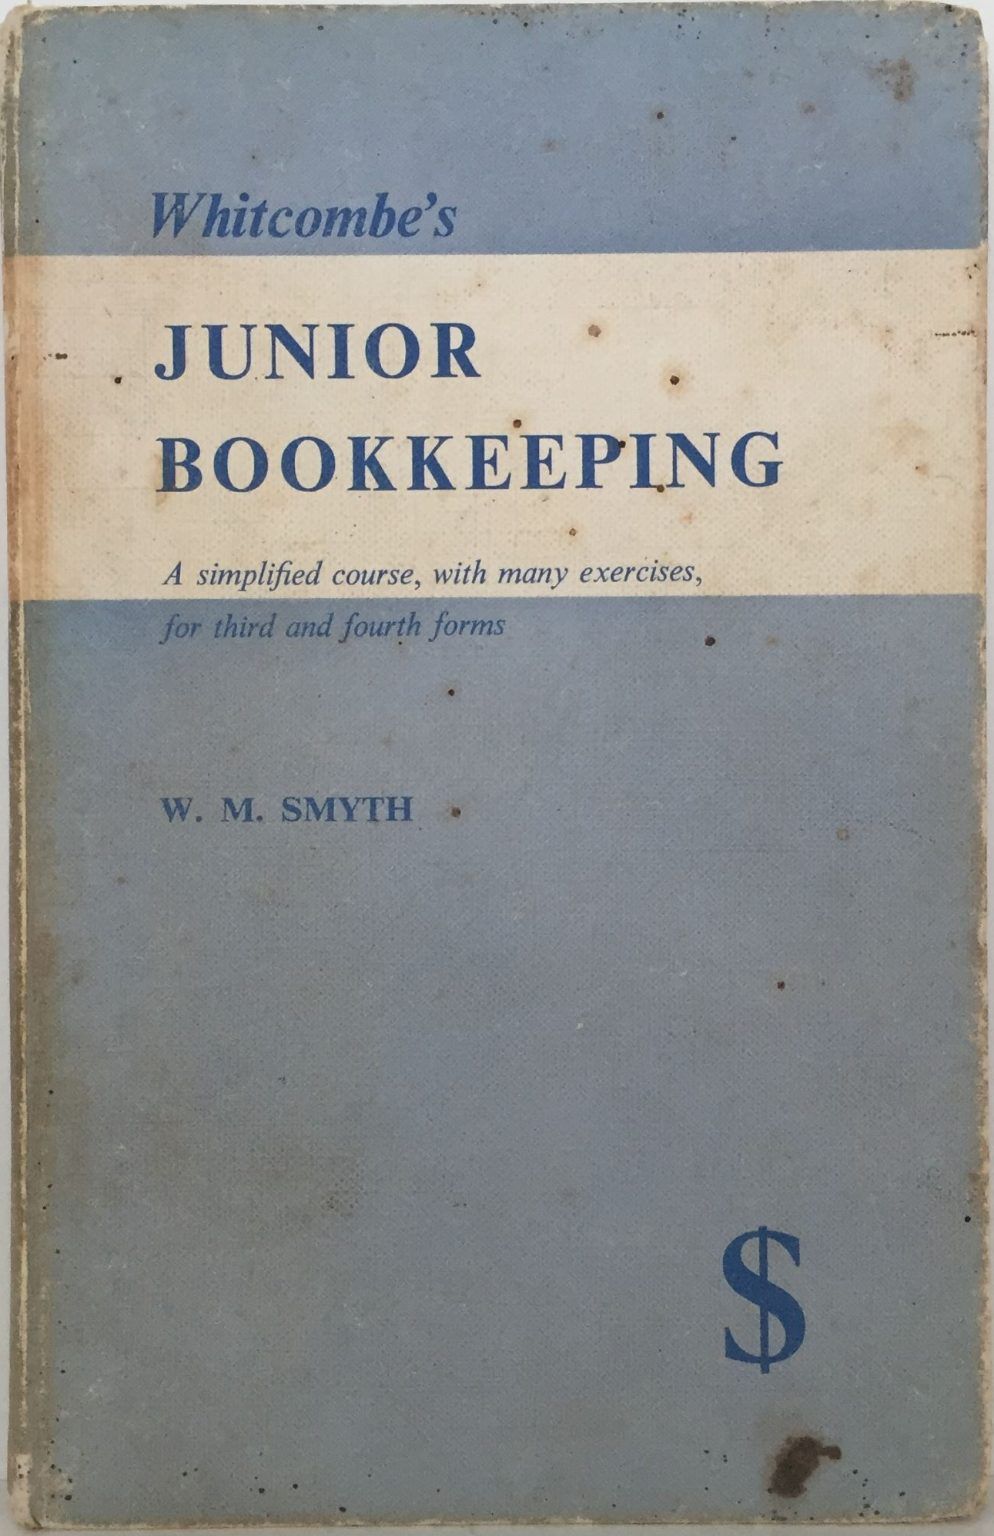 JUNIOR BOOKKEEPING: A Simplified Course, revised for decimal currency